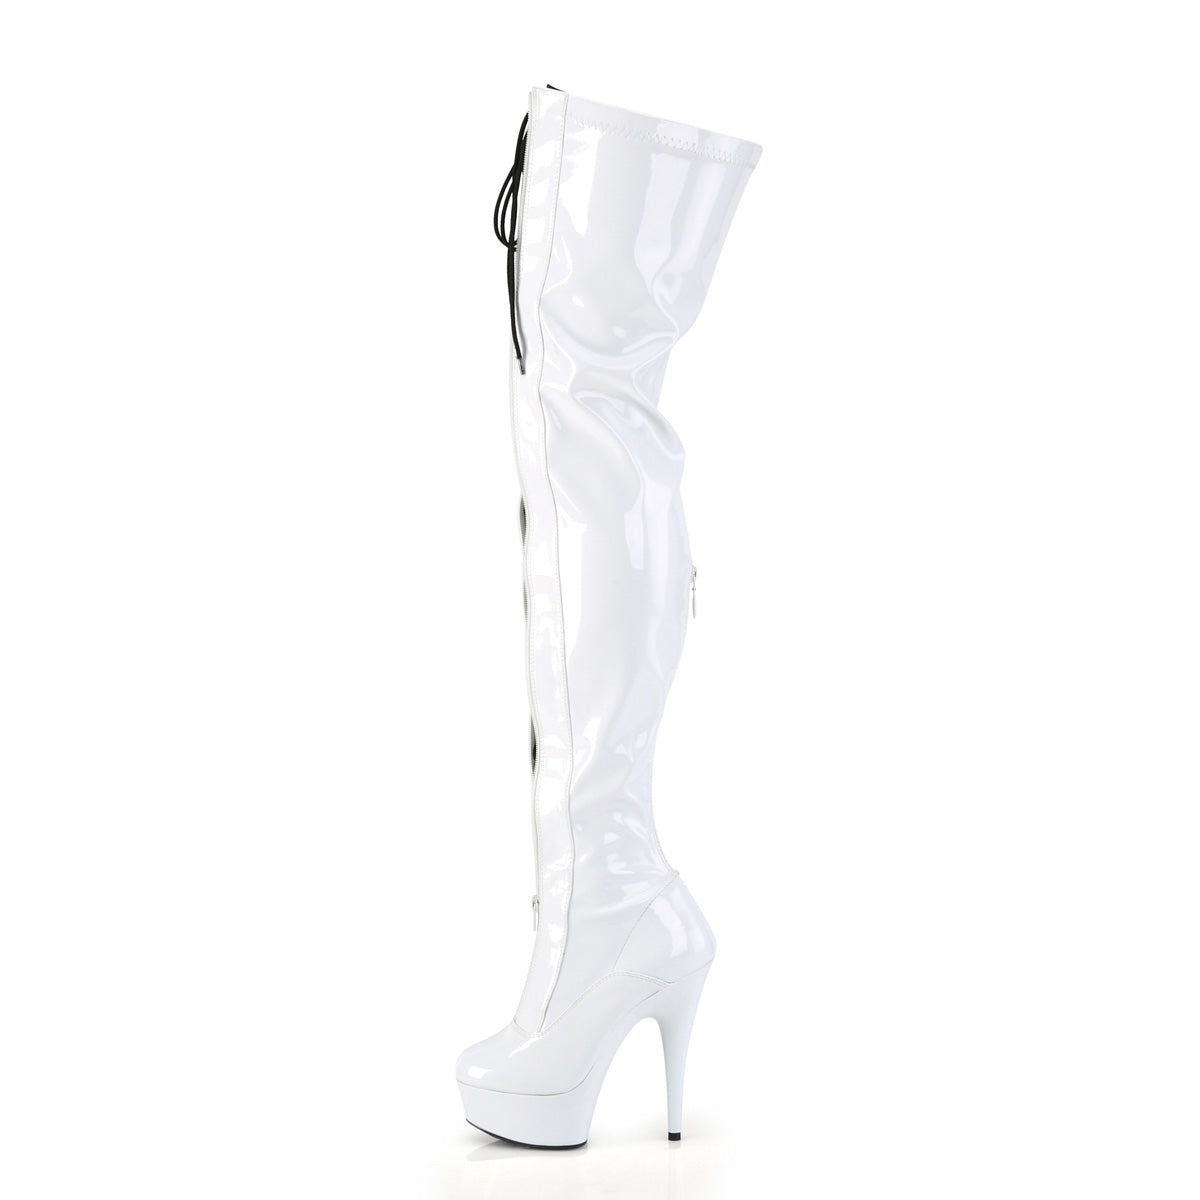 DELIGHT-3027 White-Black Thigh Boots